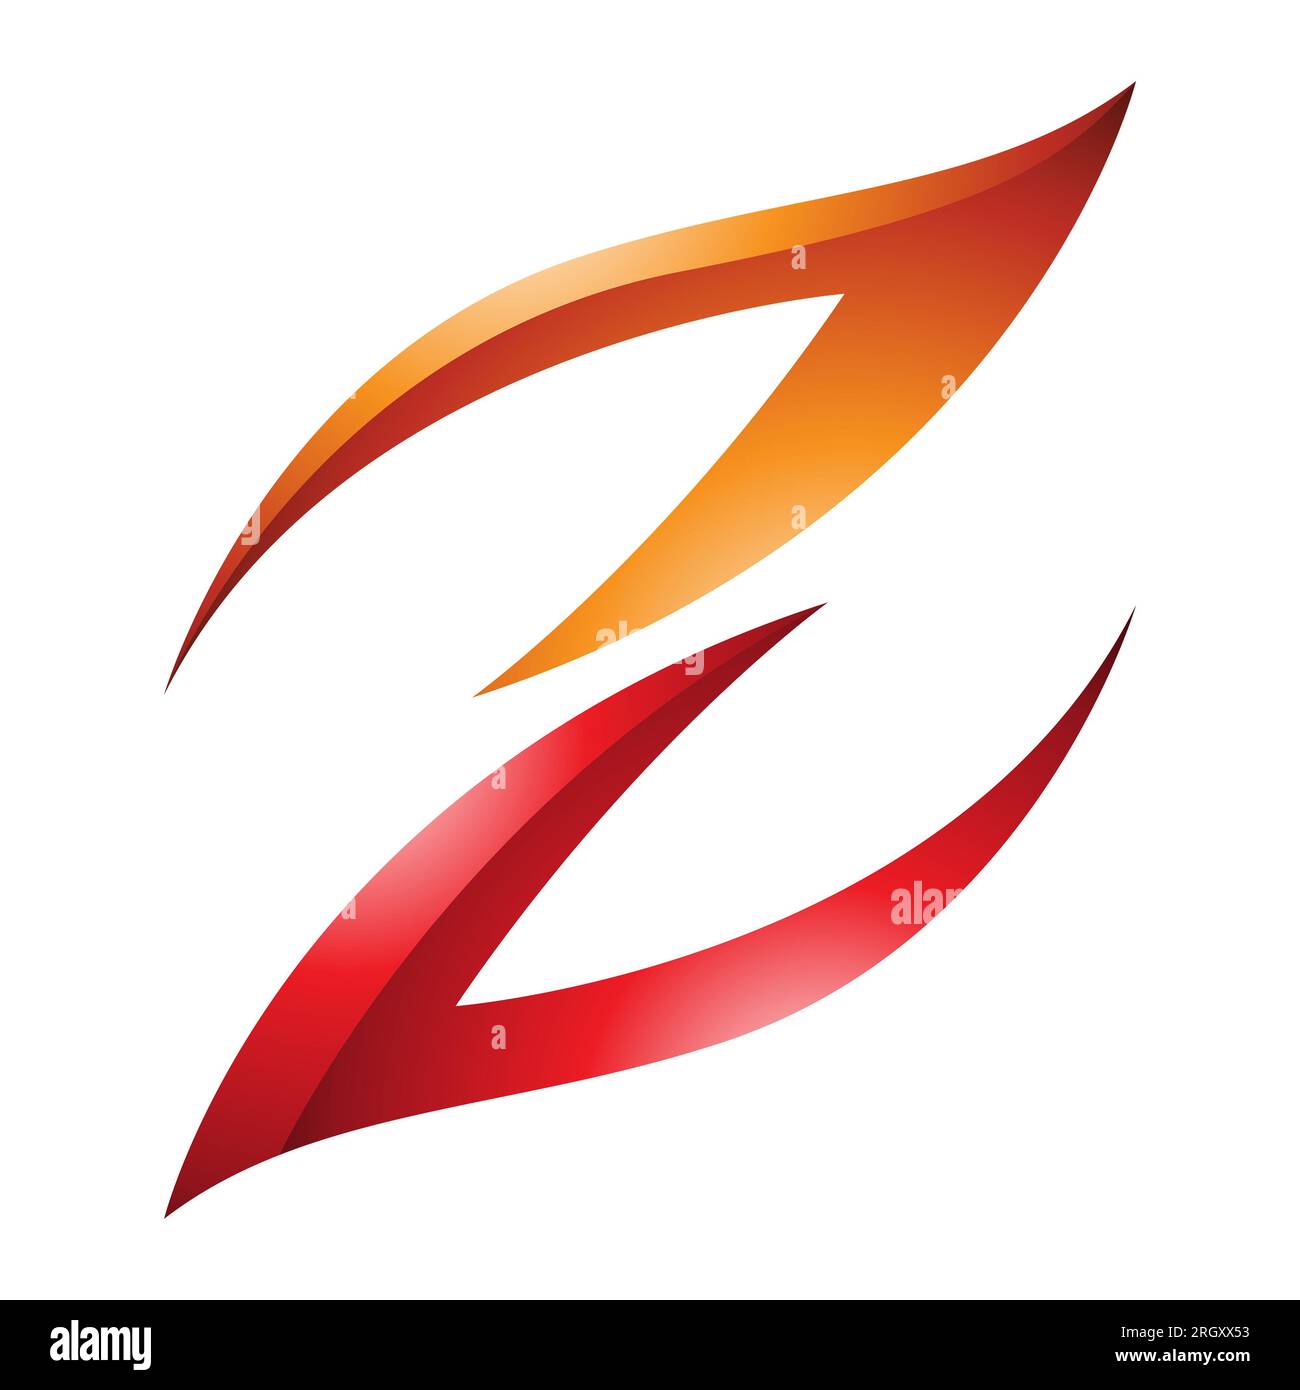 Orange and Red Glossy Fire Shaped Letter Z Icon on a White Background Stock Photo